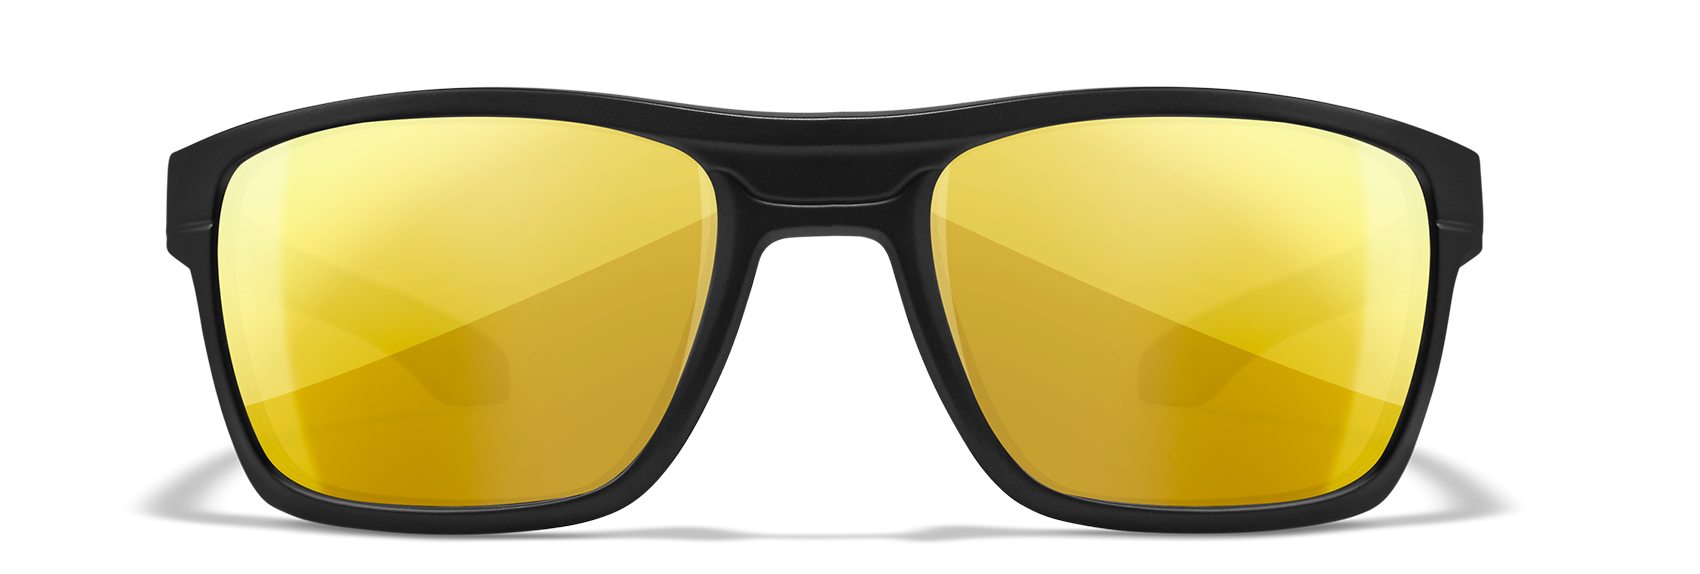 Wiley X WX Kingpin Gold Mirror Polycarbonate Sunglasses